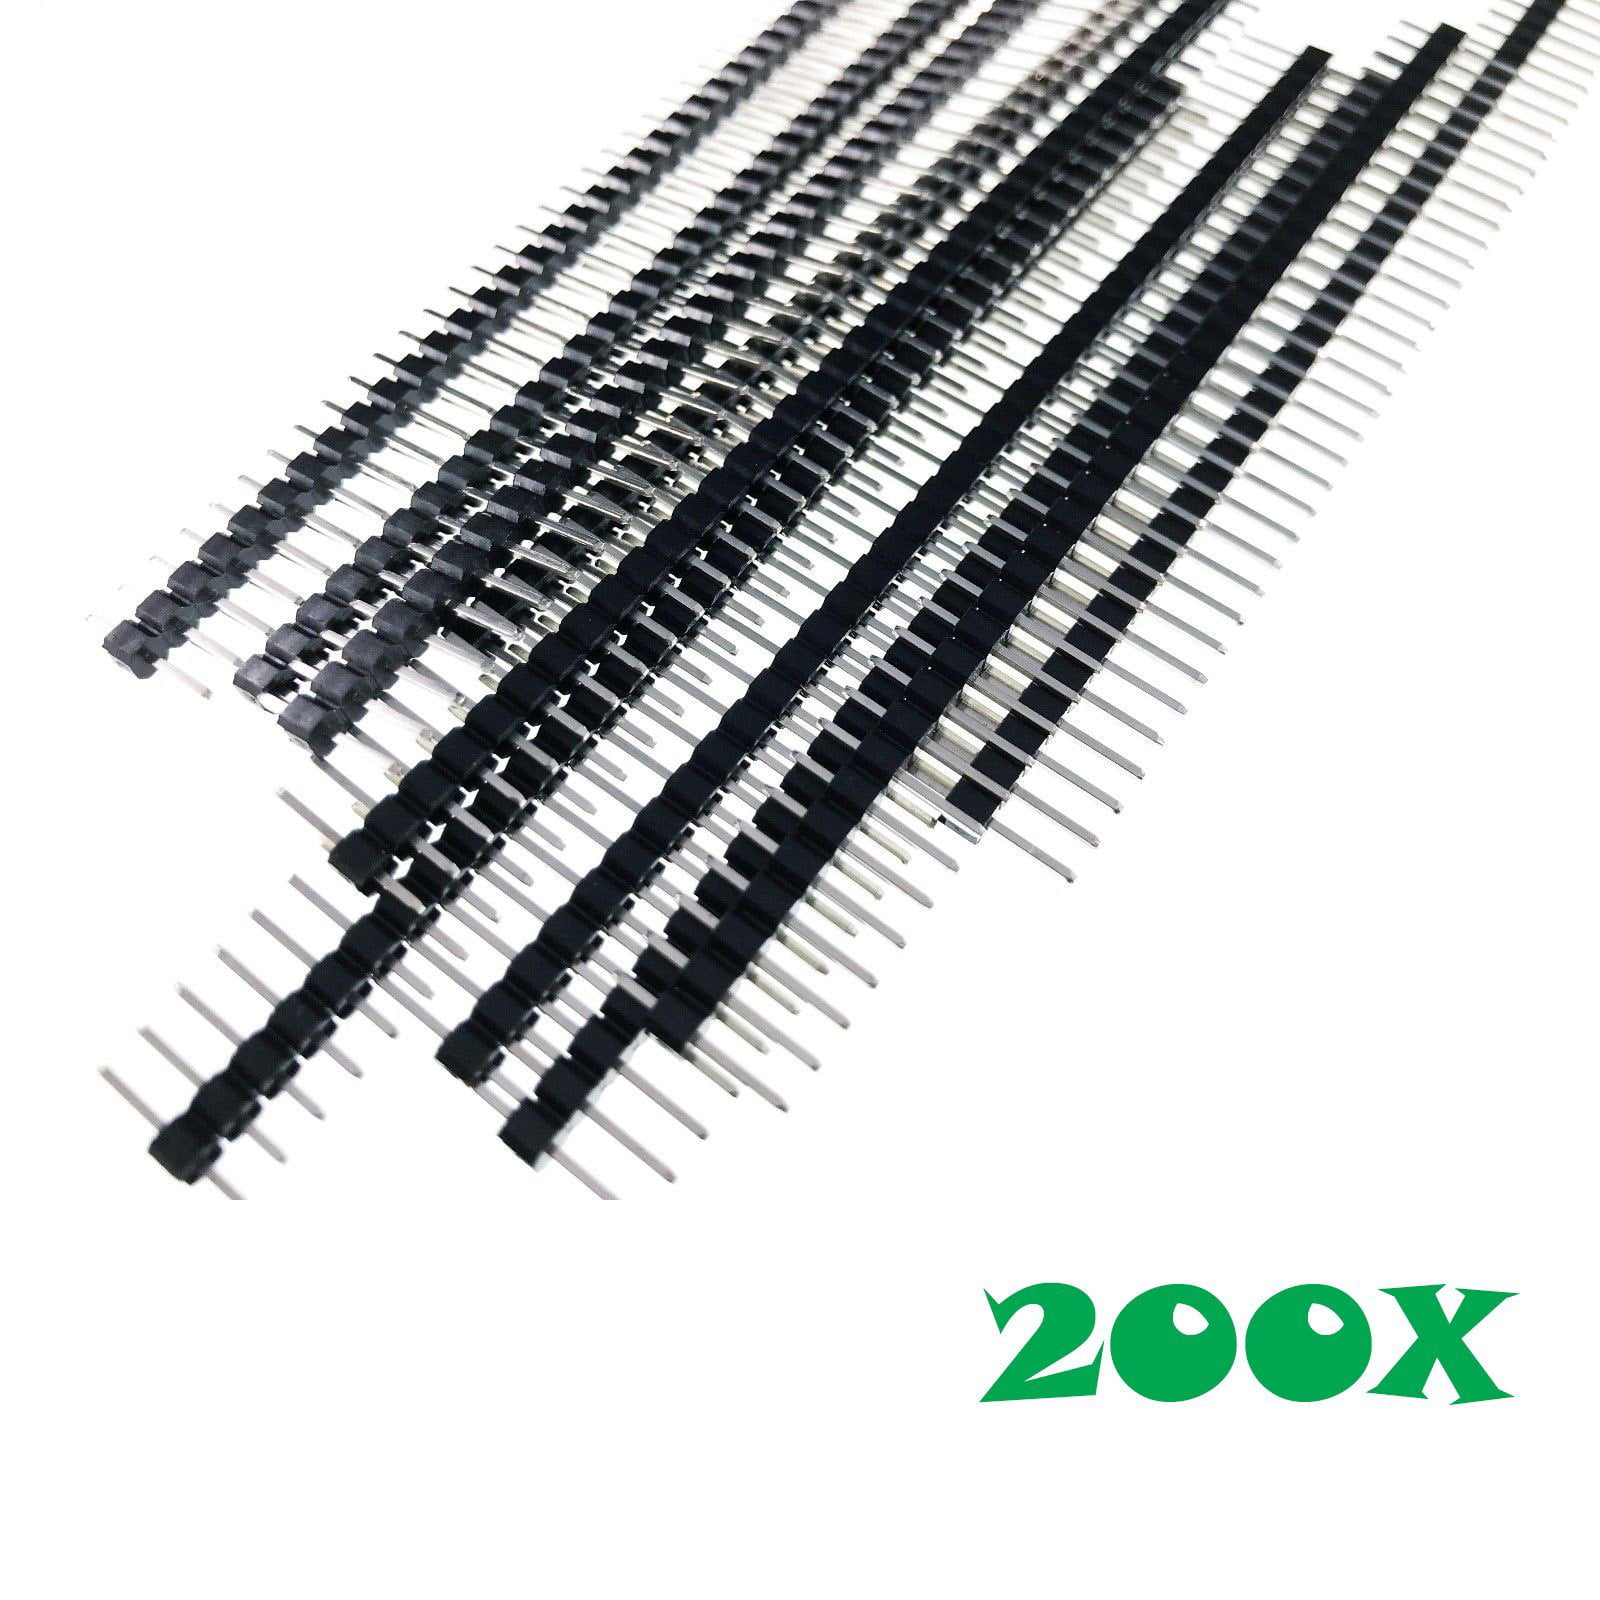 100x Pitch 2x40 Pin 2.0mm Male Double Row Straight Pin Header Strip 80 Pins 2mm 